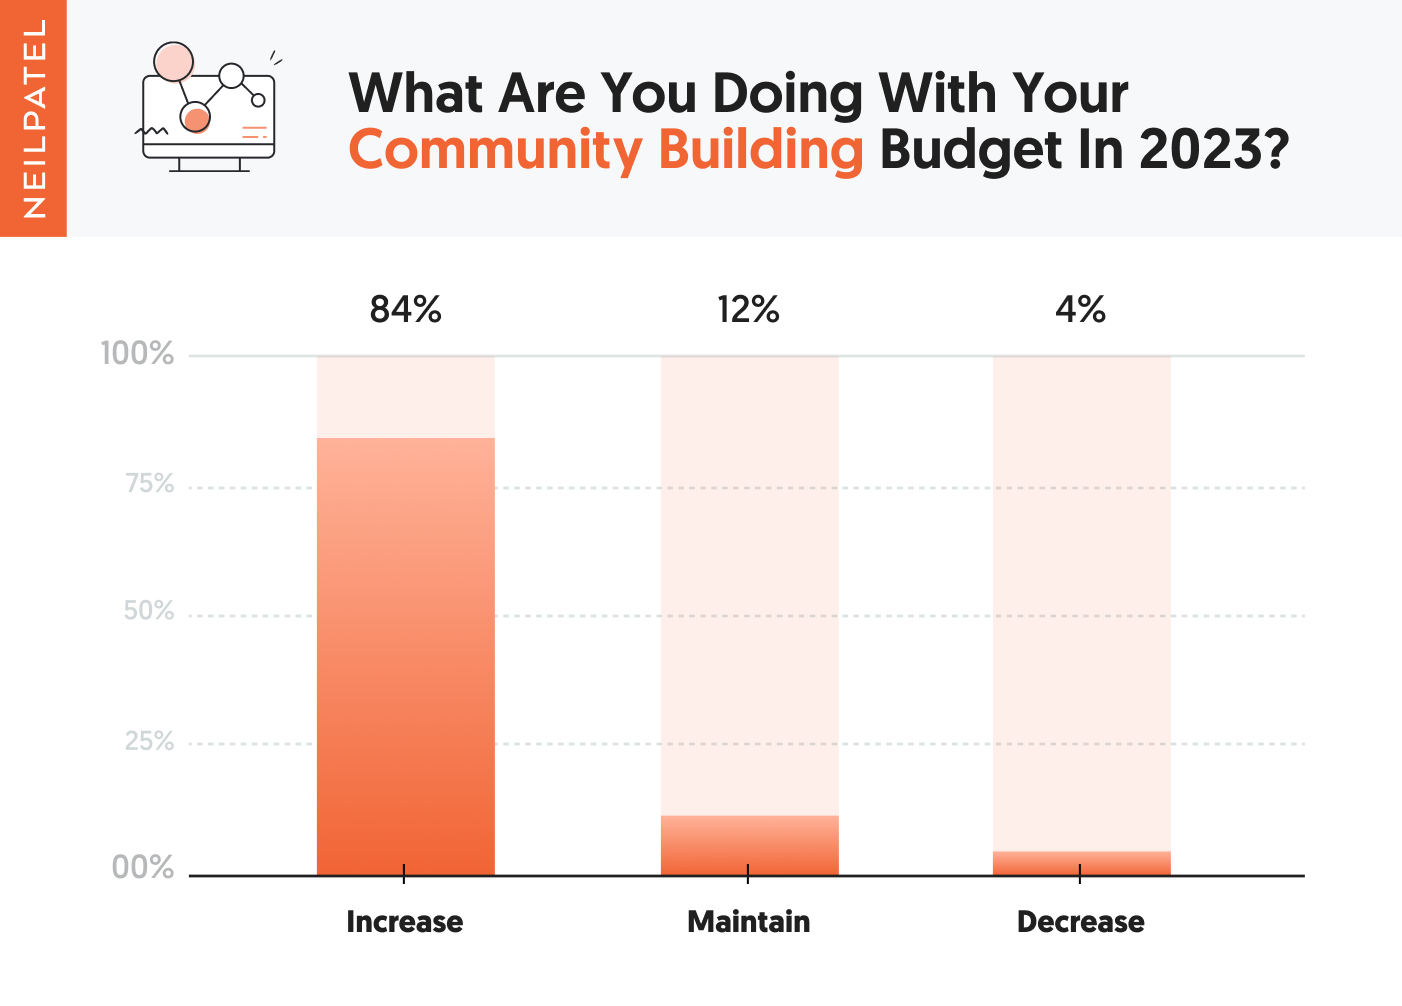 What are you doing with your community building budget in 2023